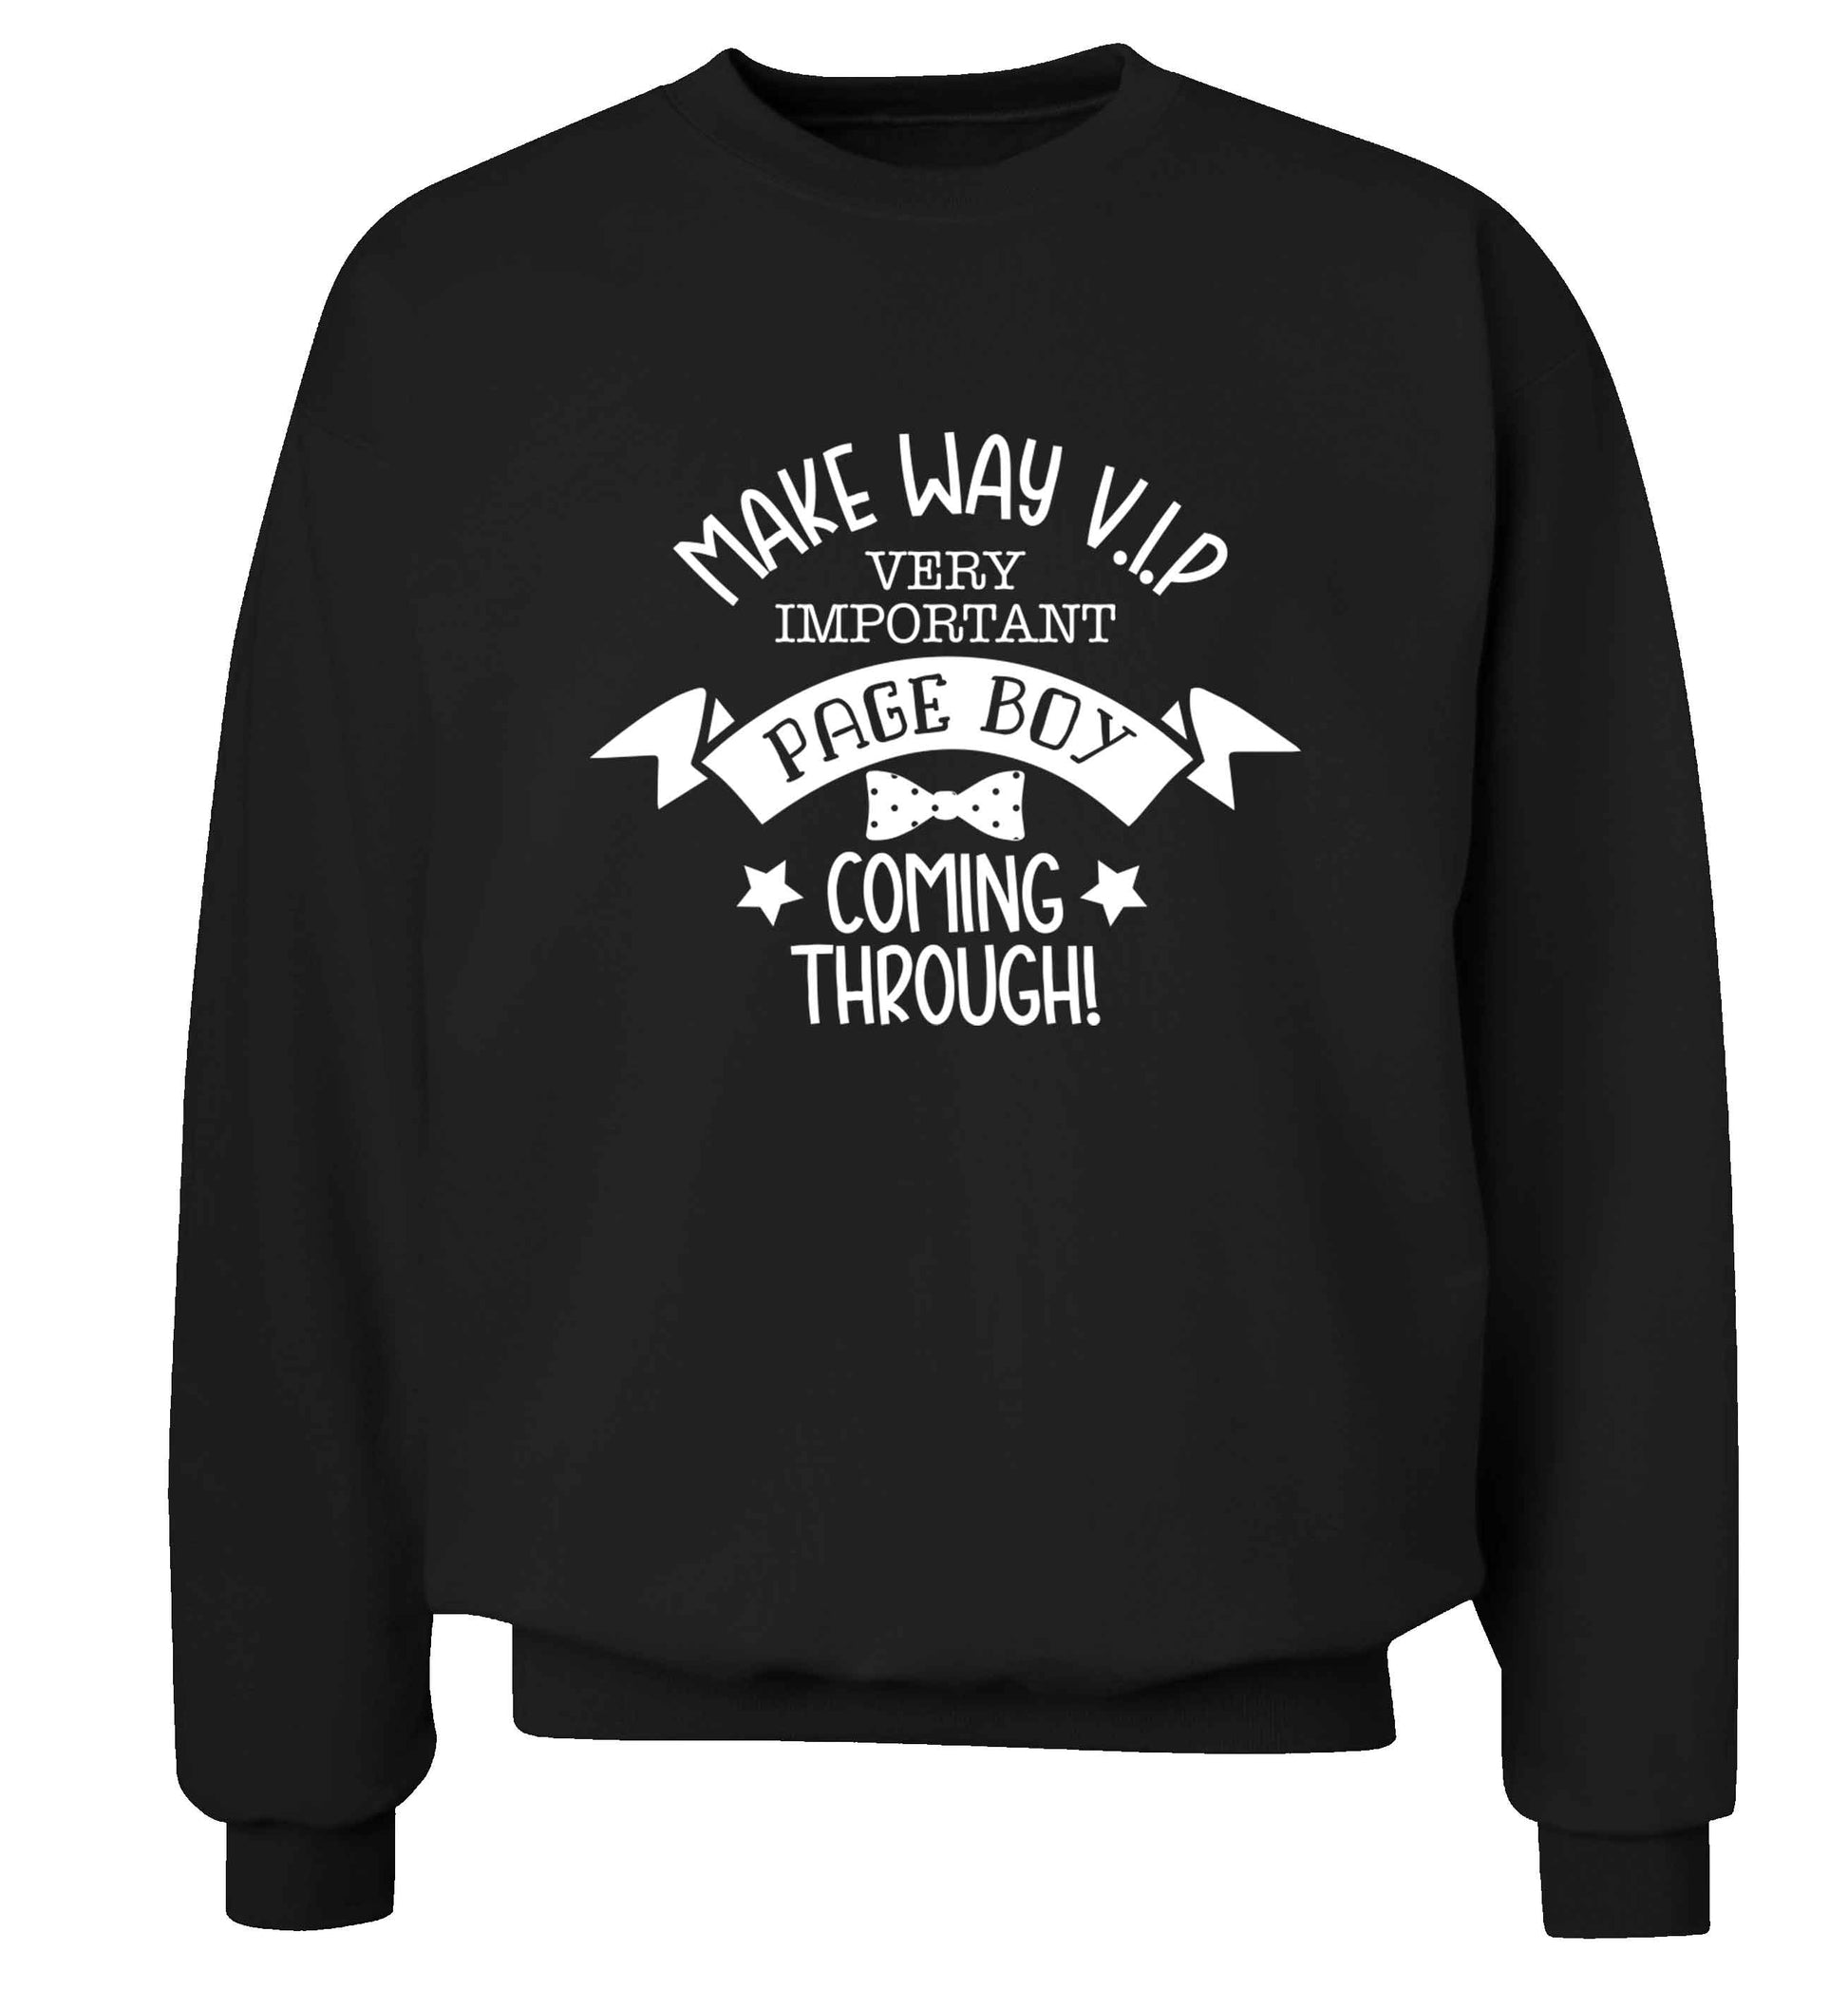 Make way V.I.P page boy coming through! Adult's unisex black Sweater 2XL